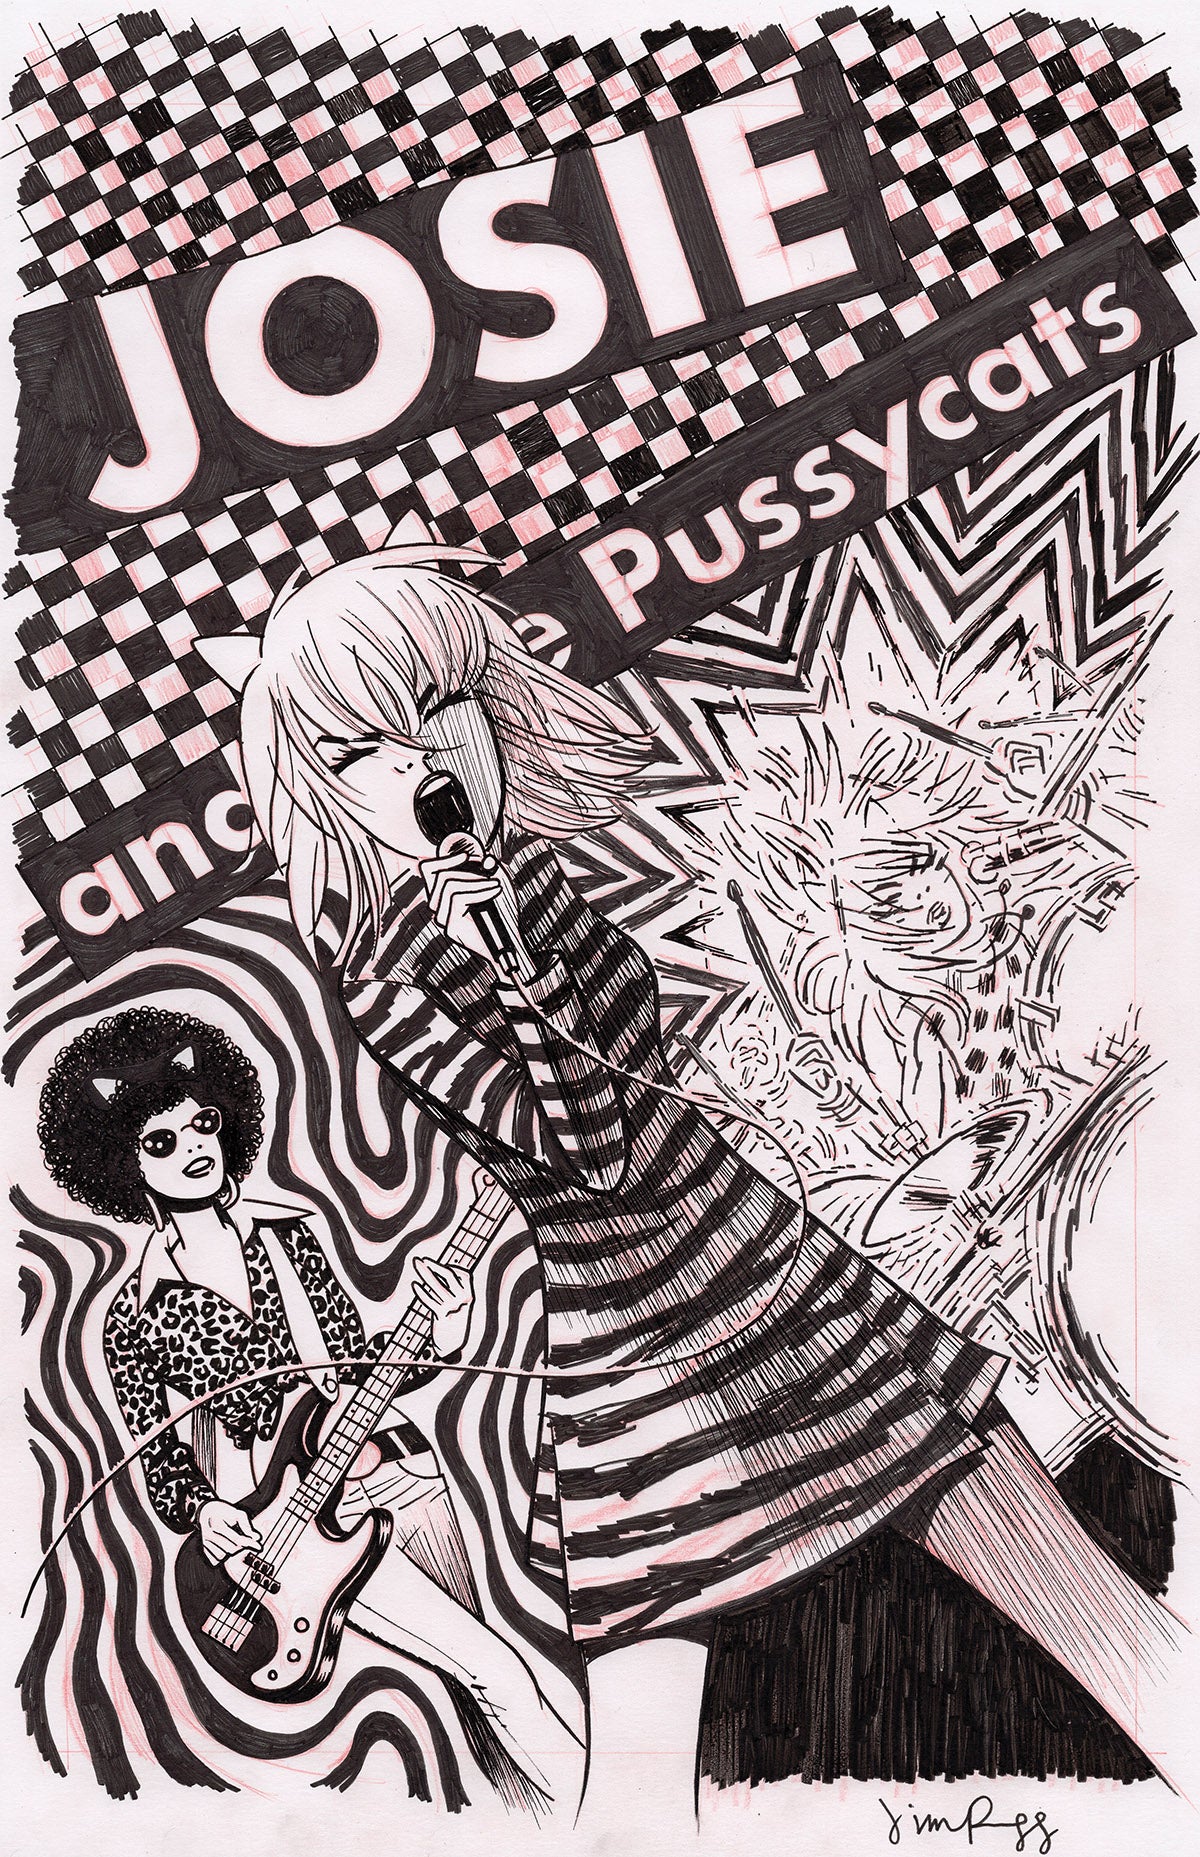 Josie and the Pussycats Anniversary Spectacular Jim Rugg black & white variant